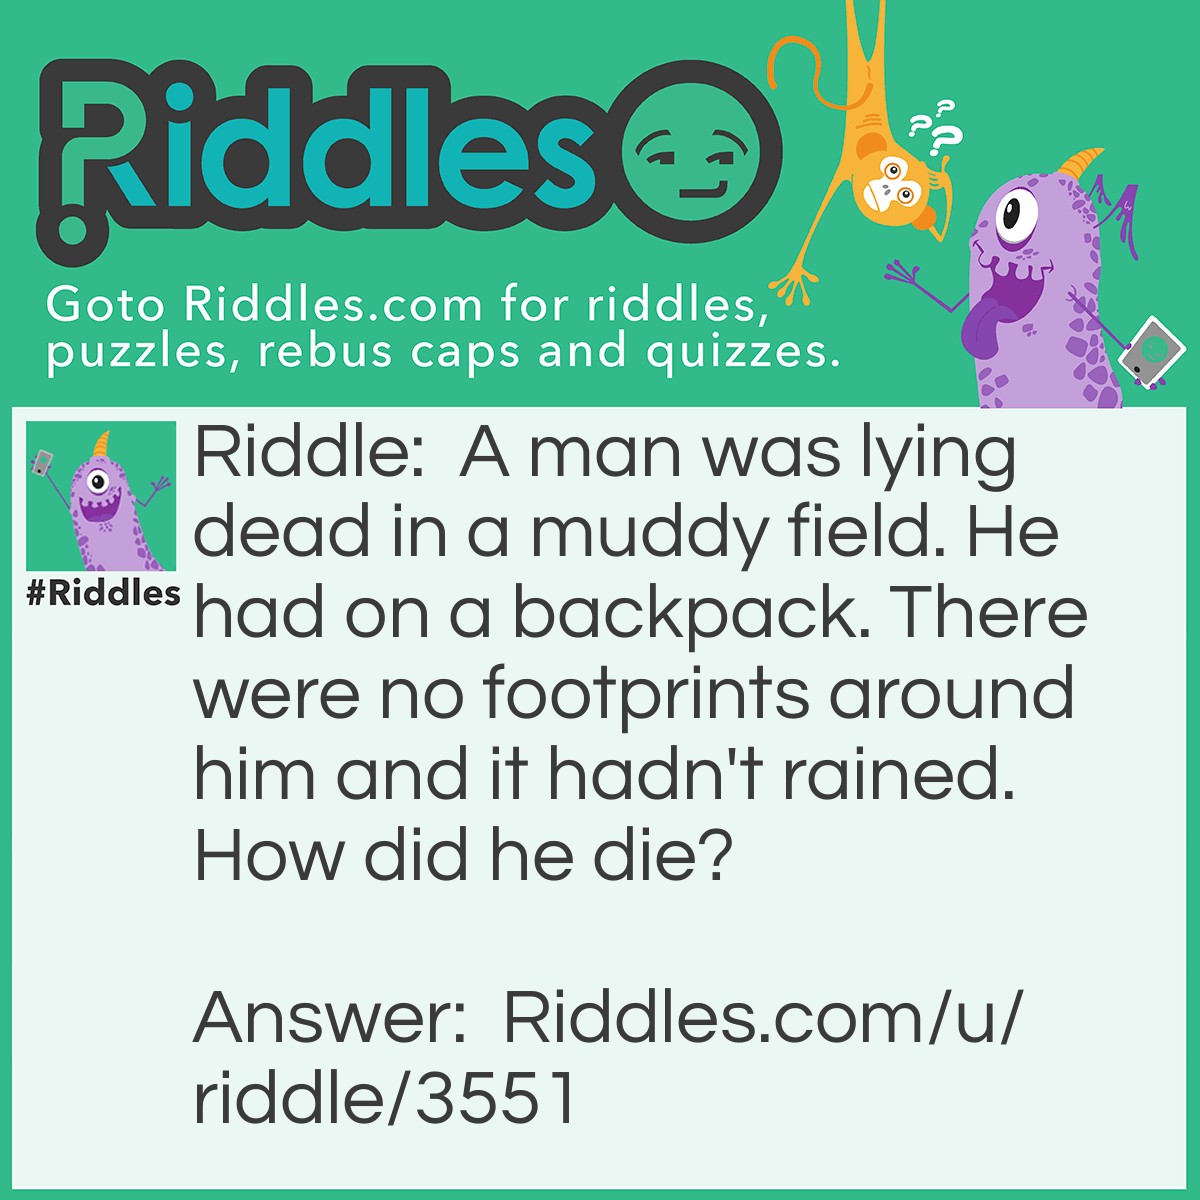 Riddle: A man was lying dead in a muddy field. He had on a backpack. There were no footprints around him and it hadn't rained. How did he die? Answer: The man was skydiving and his parachute didn't open.